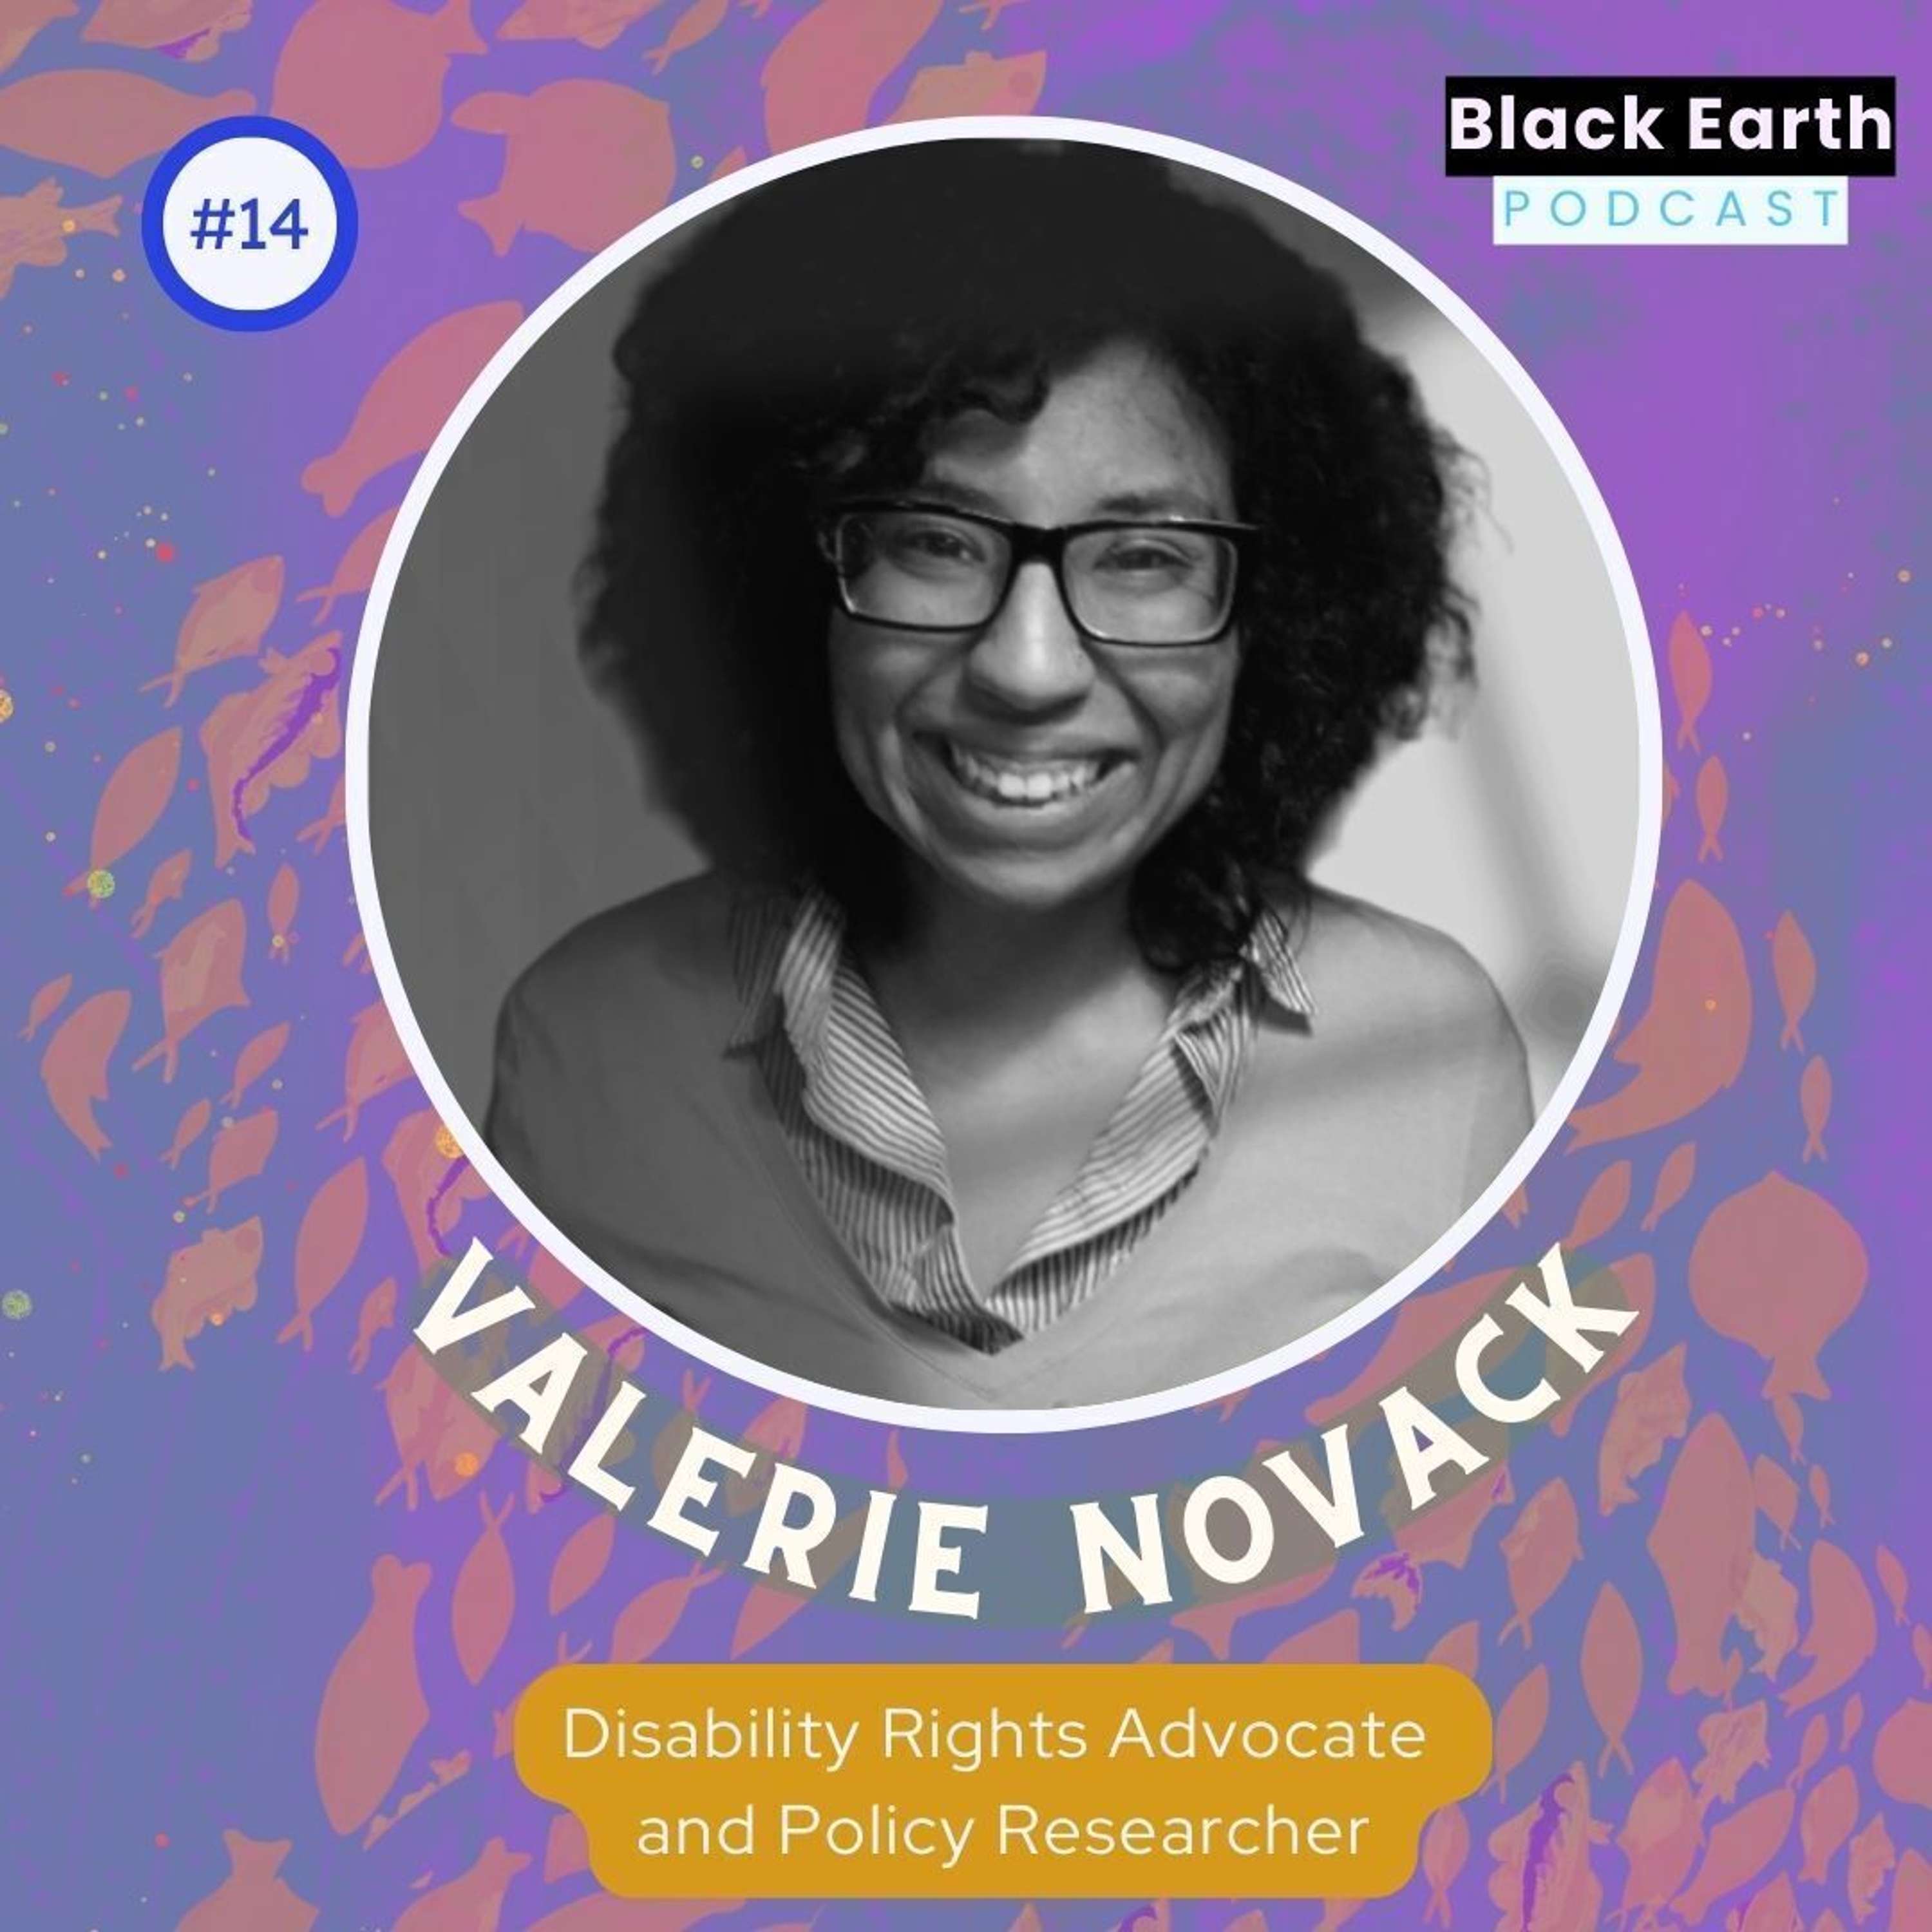 Disability justice and Earth care with Valerie Novack